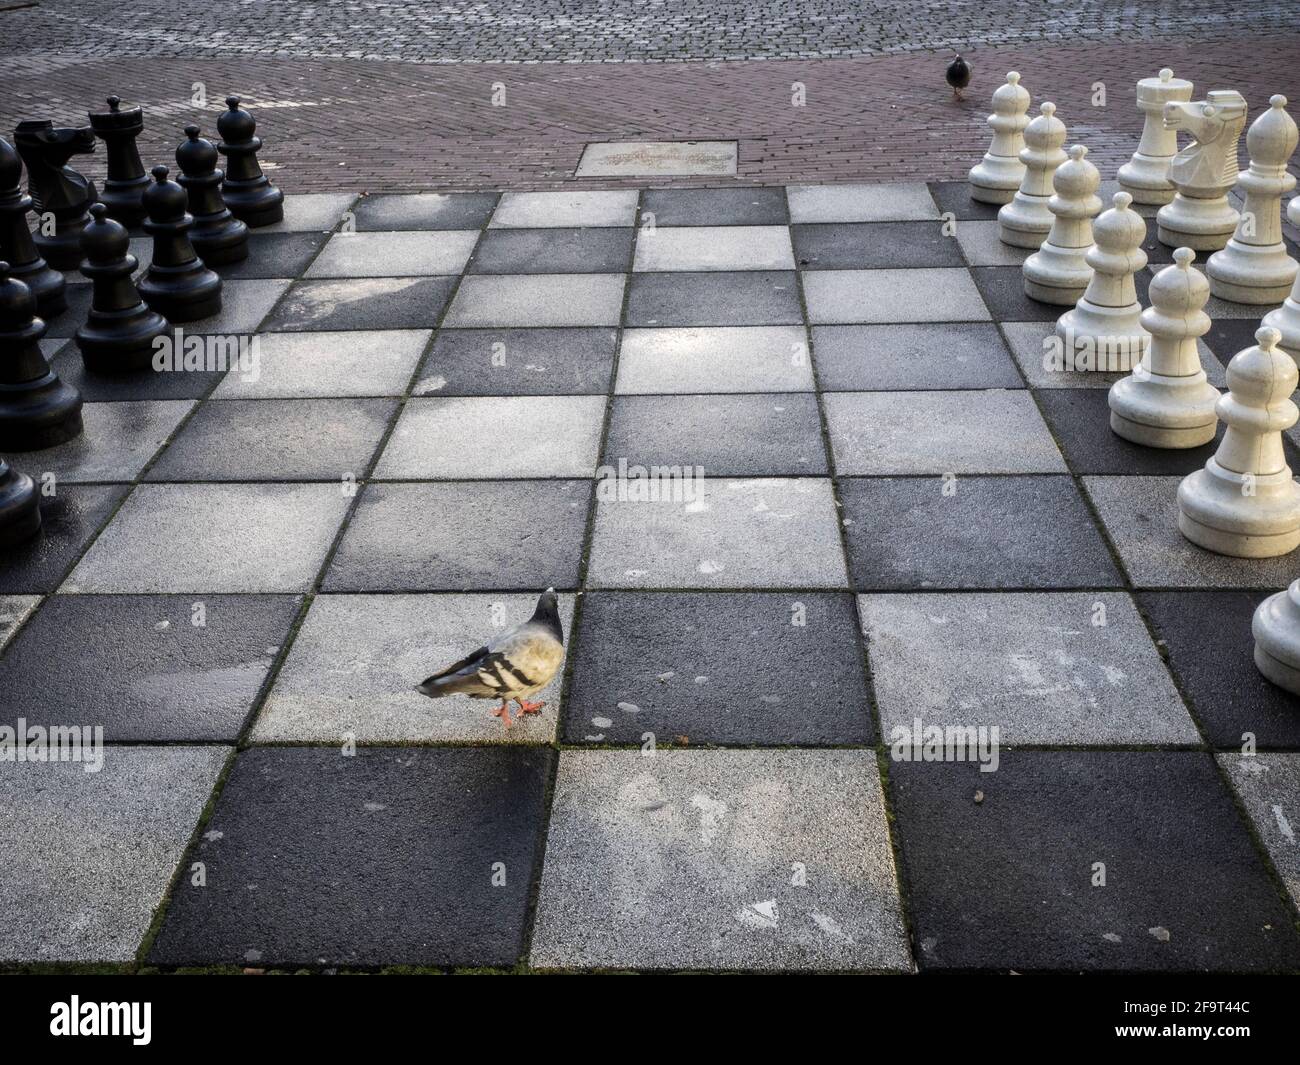 A pigeon wanders among the pieces of a street chess set in Amsterdam. Stock Photo